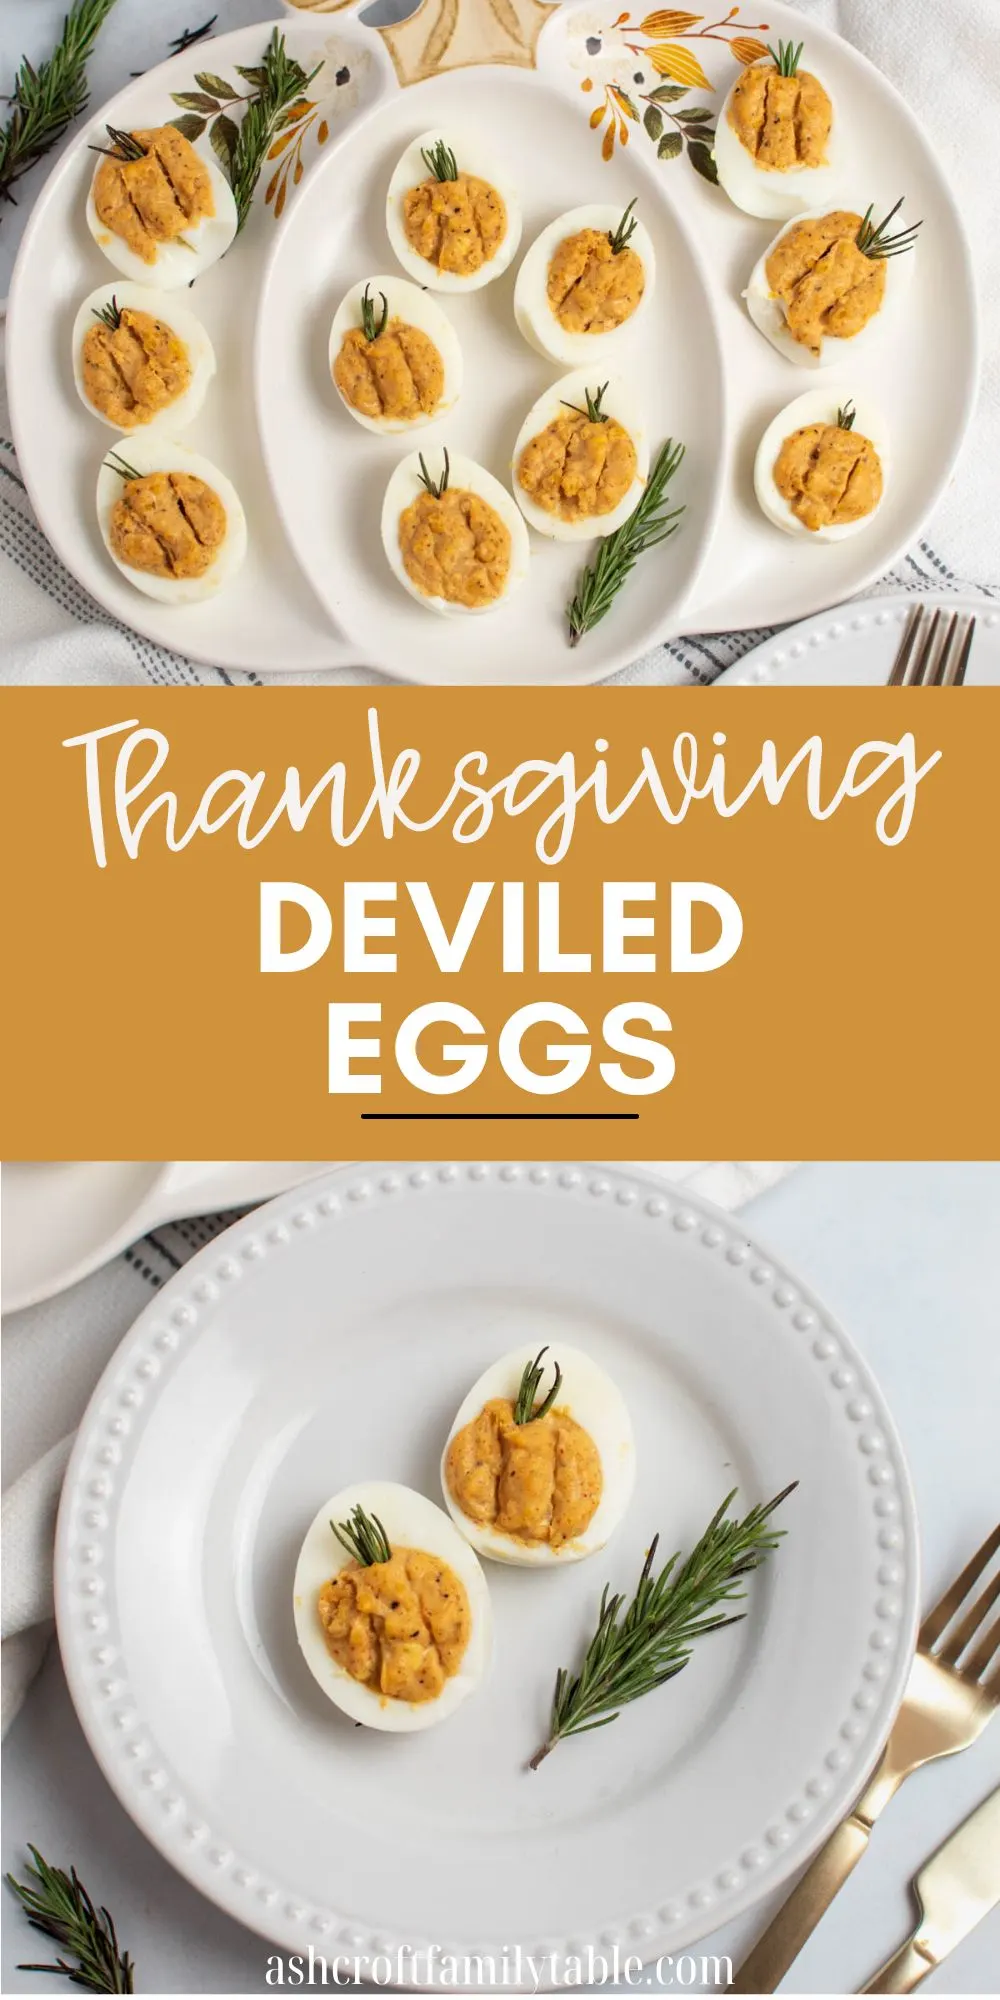 Pinterest graphic with text and photos of Thanksgiving deviled eggs on white plates.